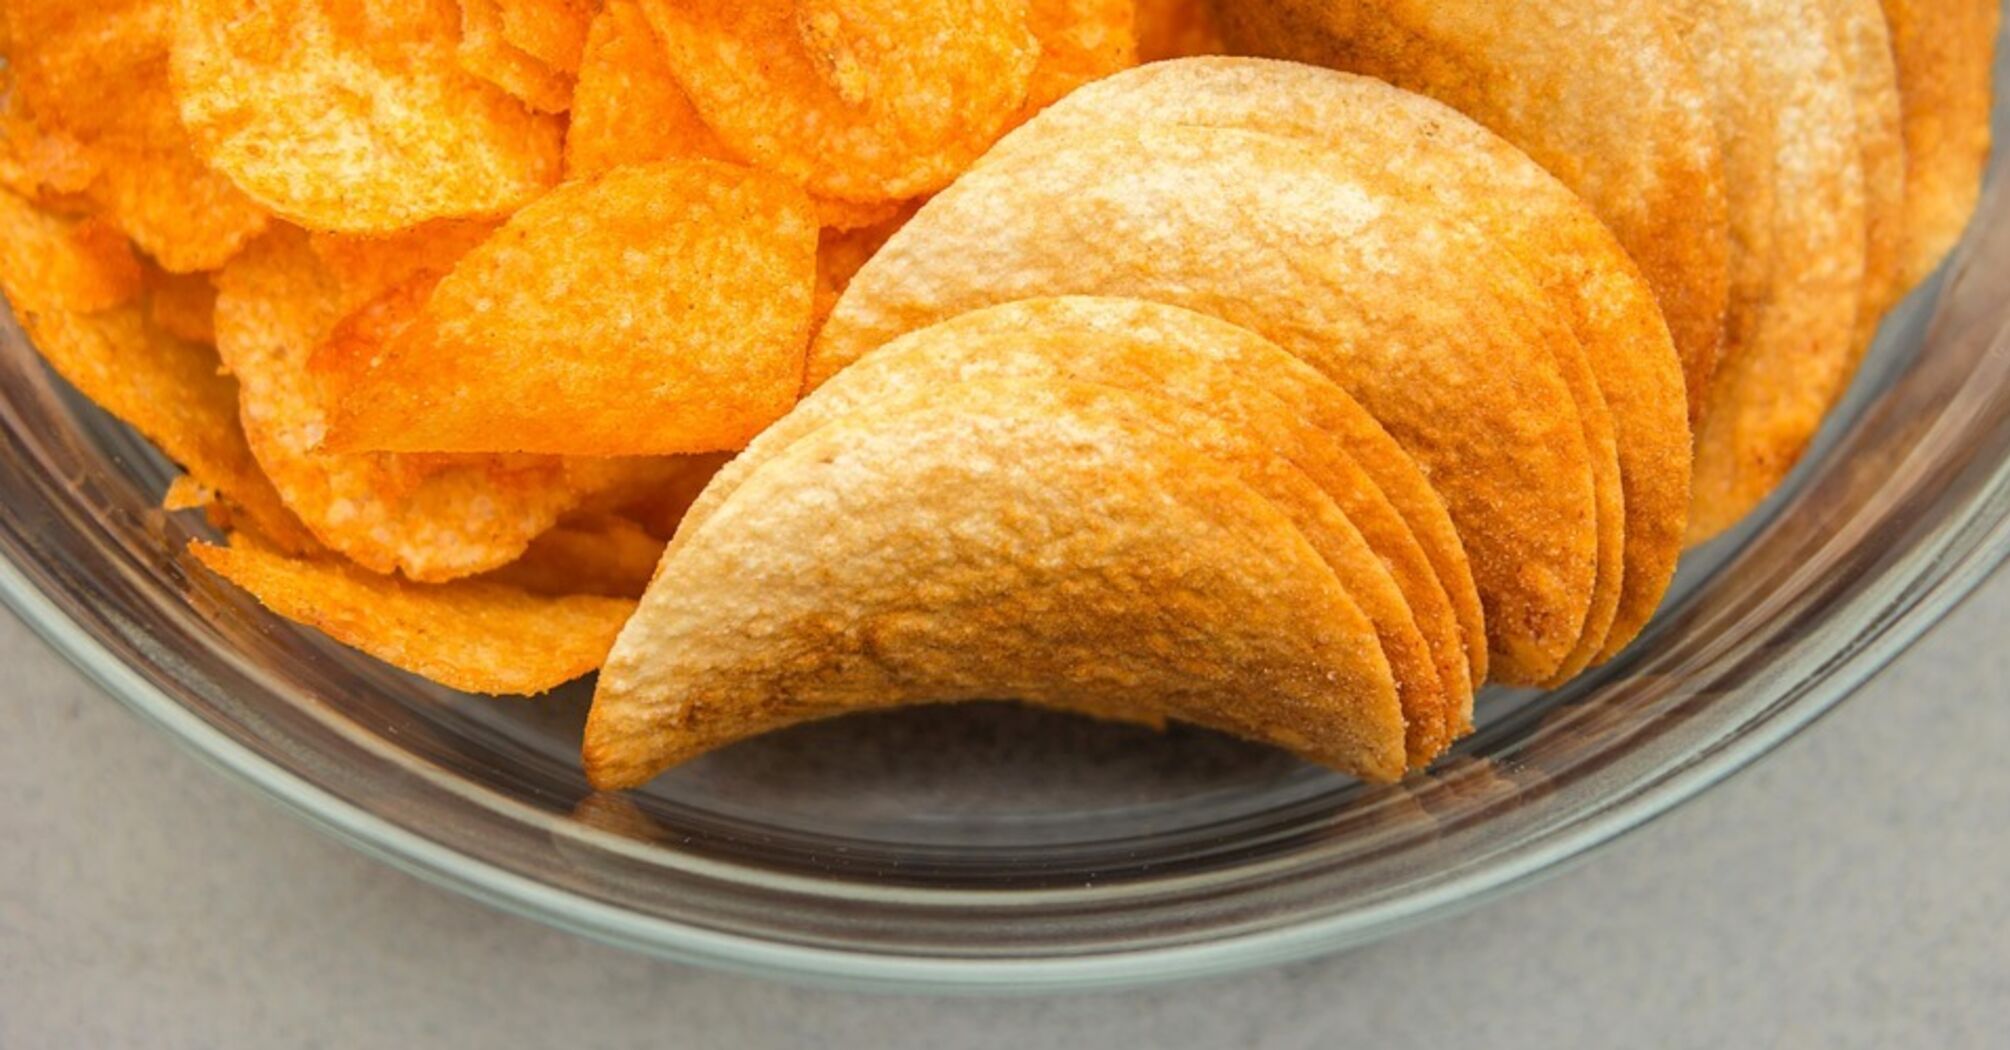 What to make safe potato chips: can be eaten by children